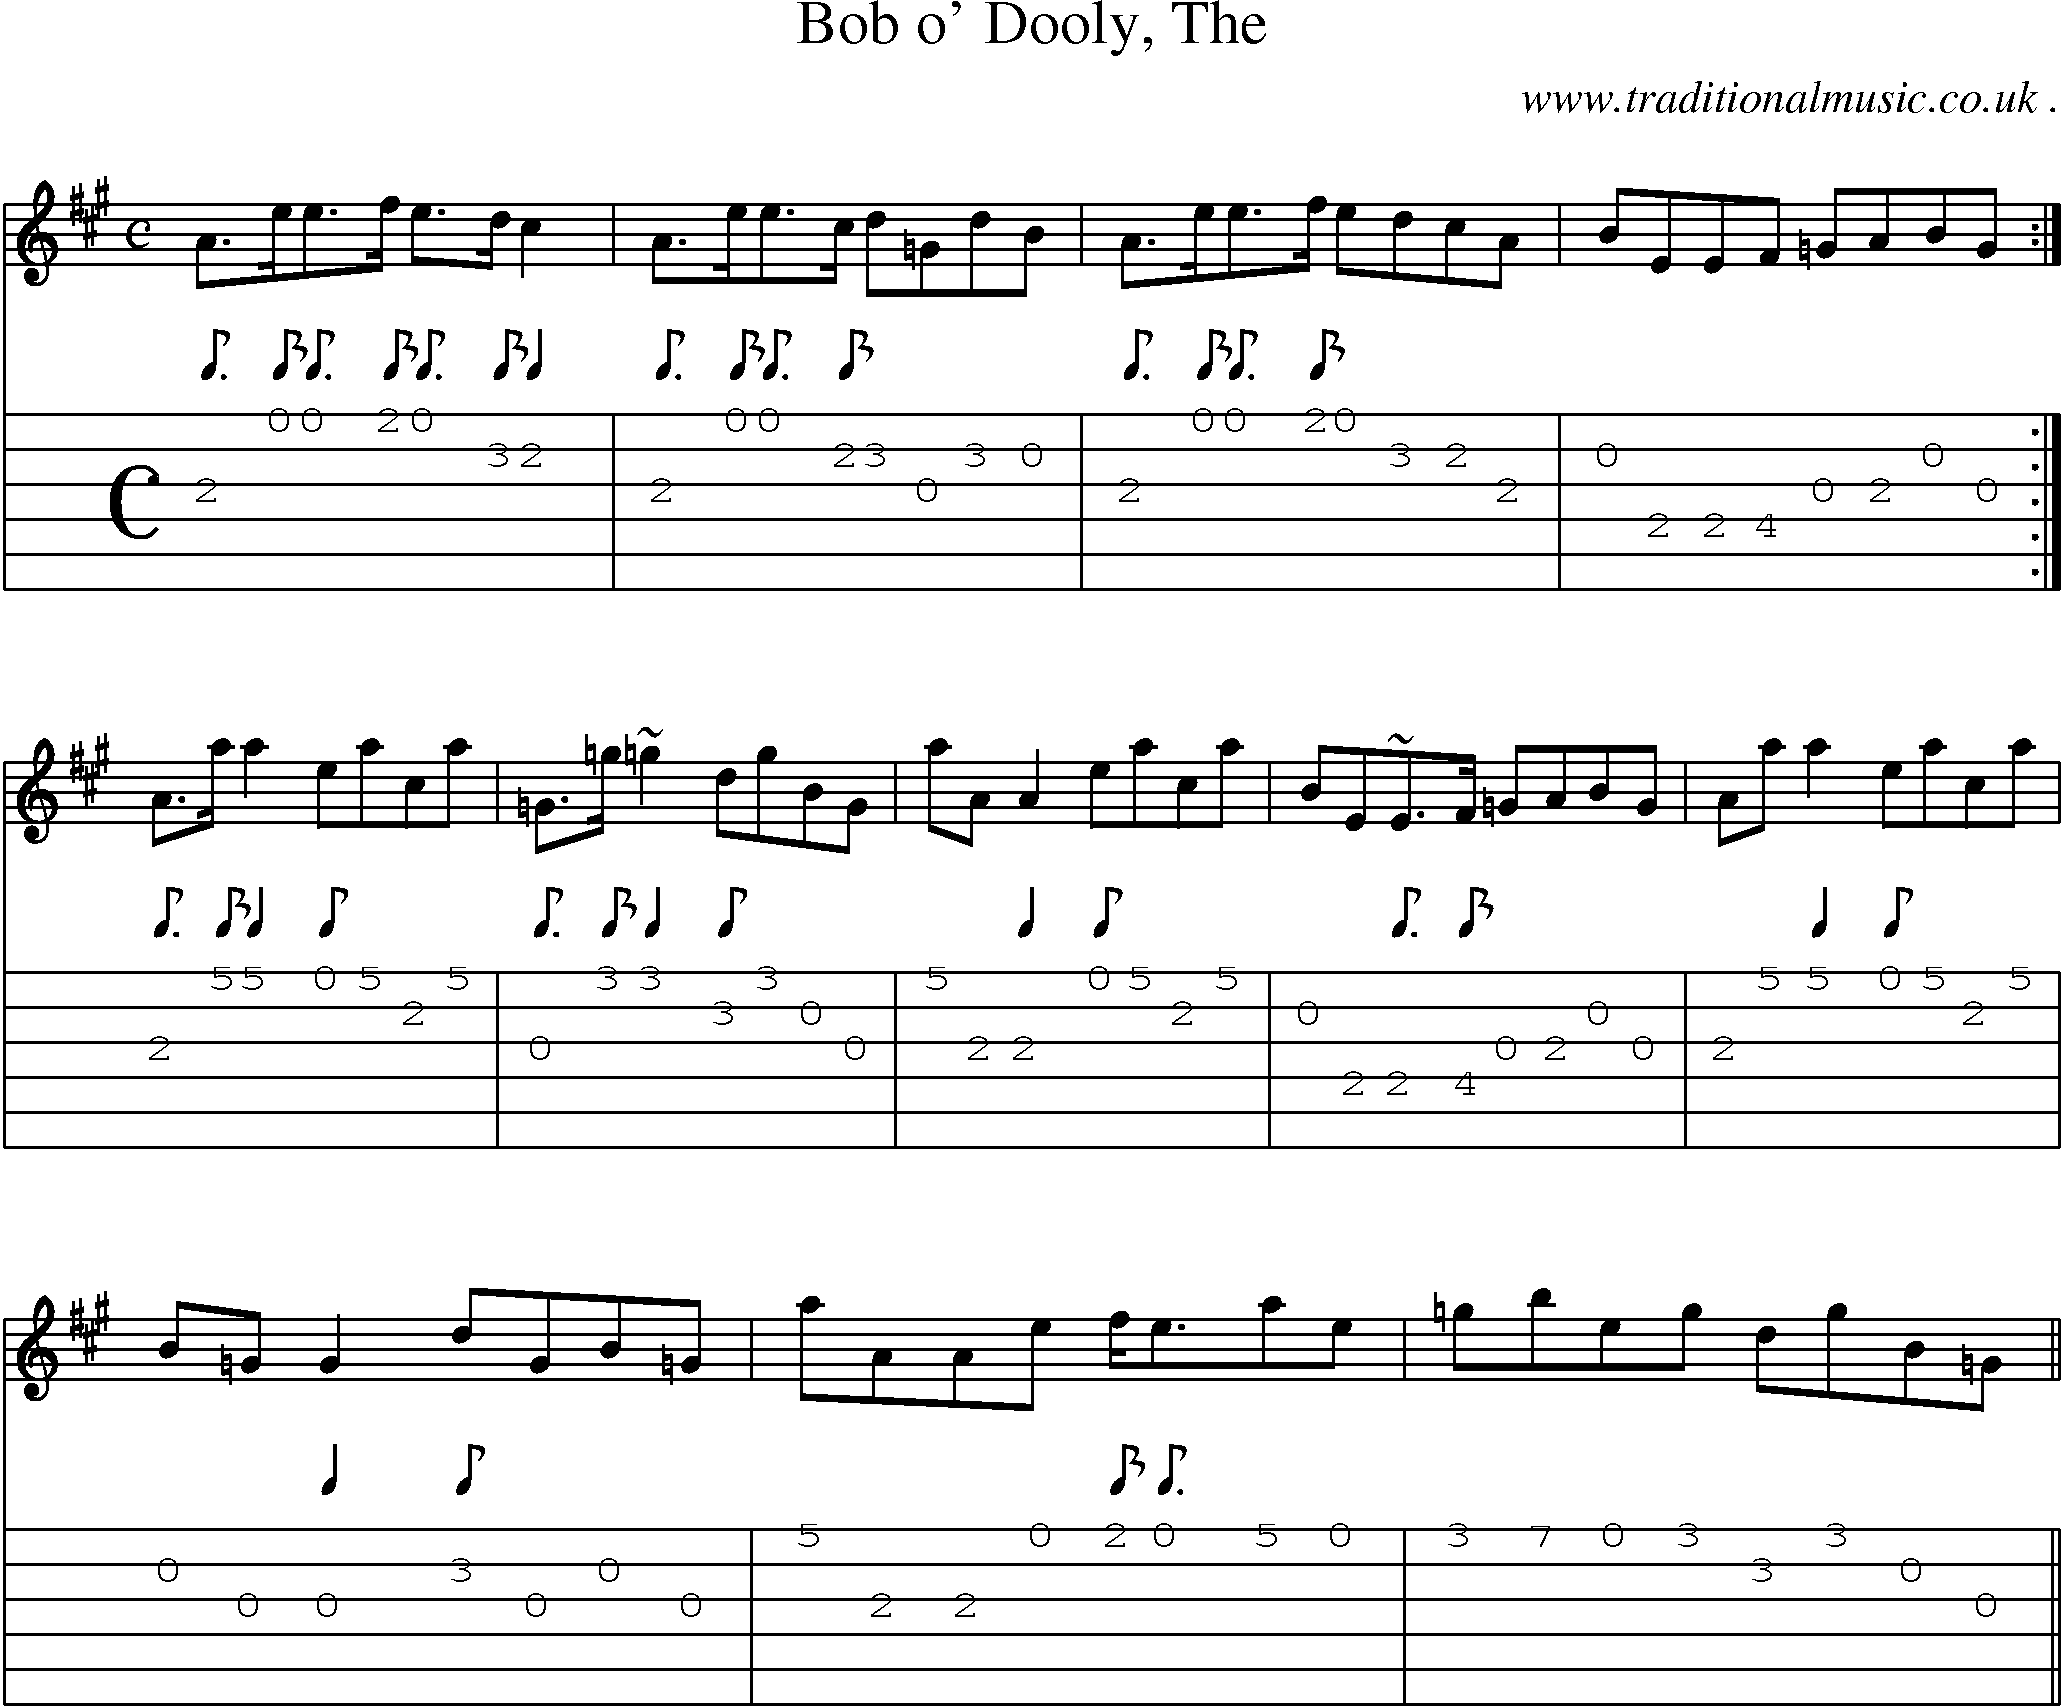 Sheet-music  score, Chords and Guitar Tabs for Bob O Dooly The